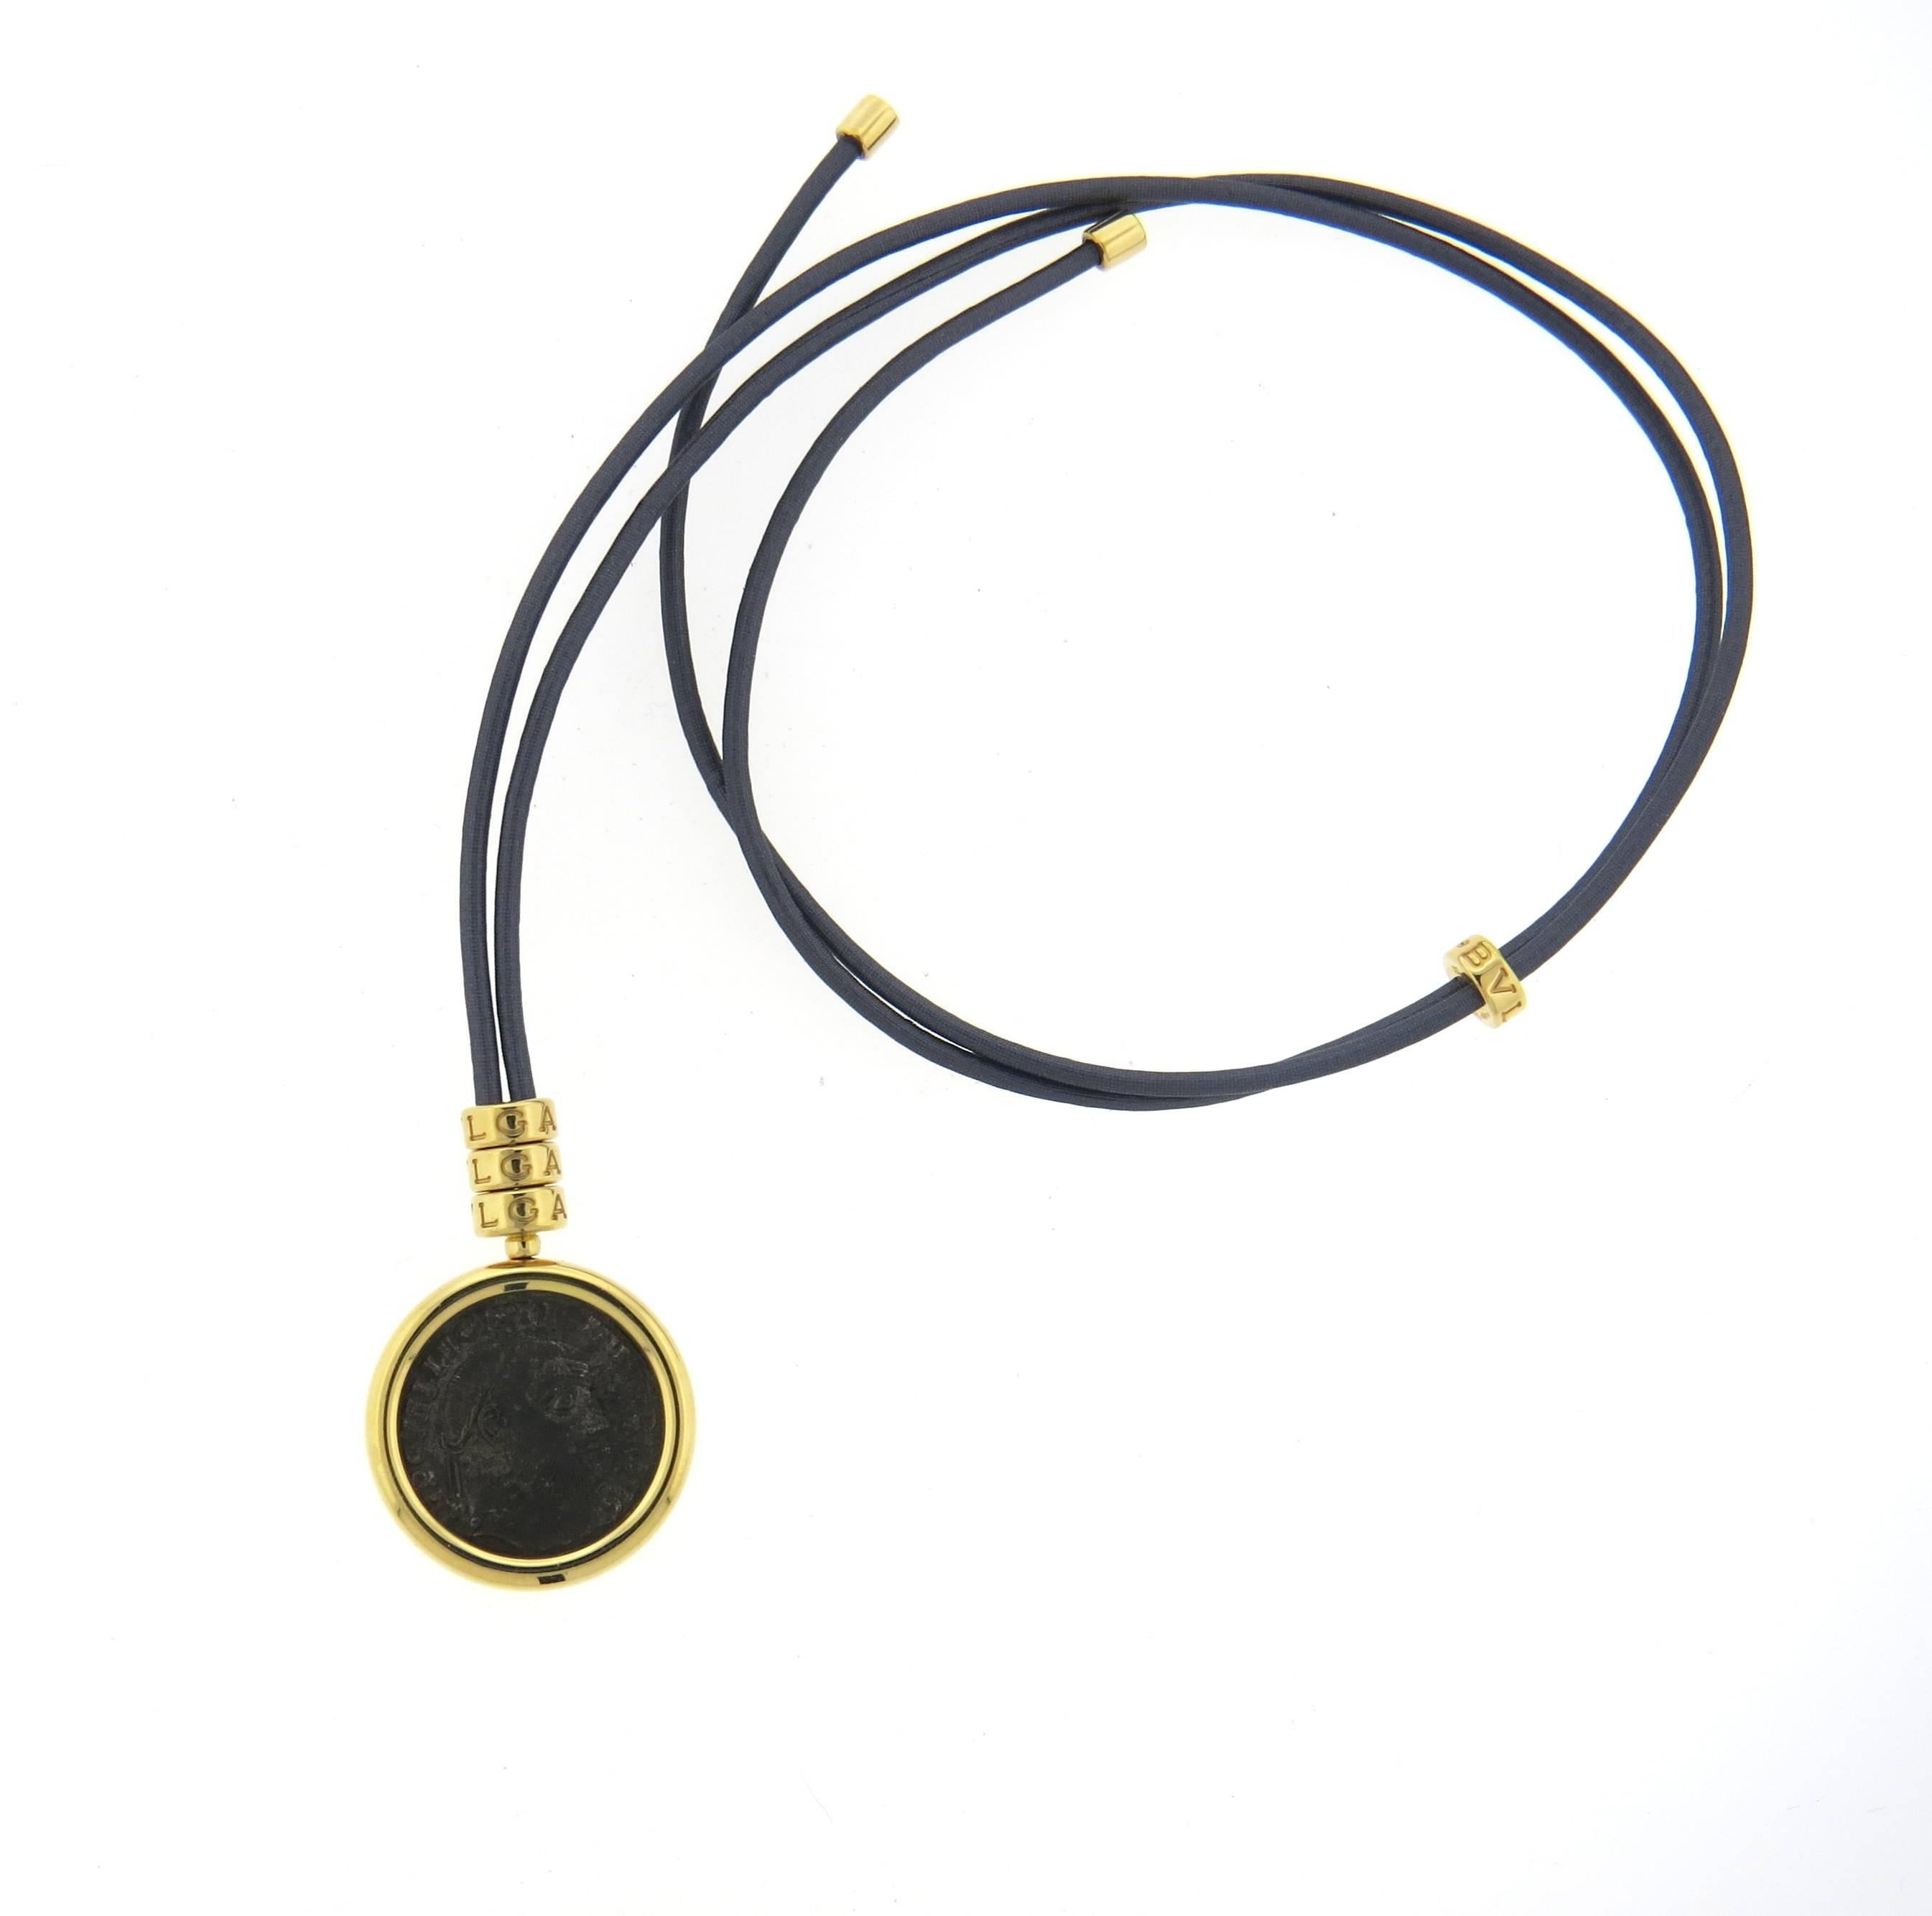 An 18k yellow gold and cord necklace, crafted by Bvlgari for Monete collection, featuring 21mm Ancient Coin. Necklace is adjustable in length up to 27